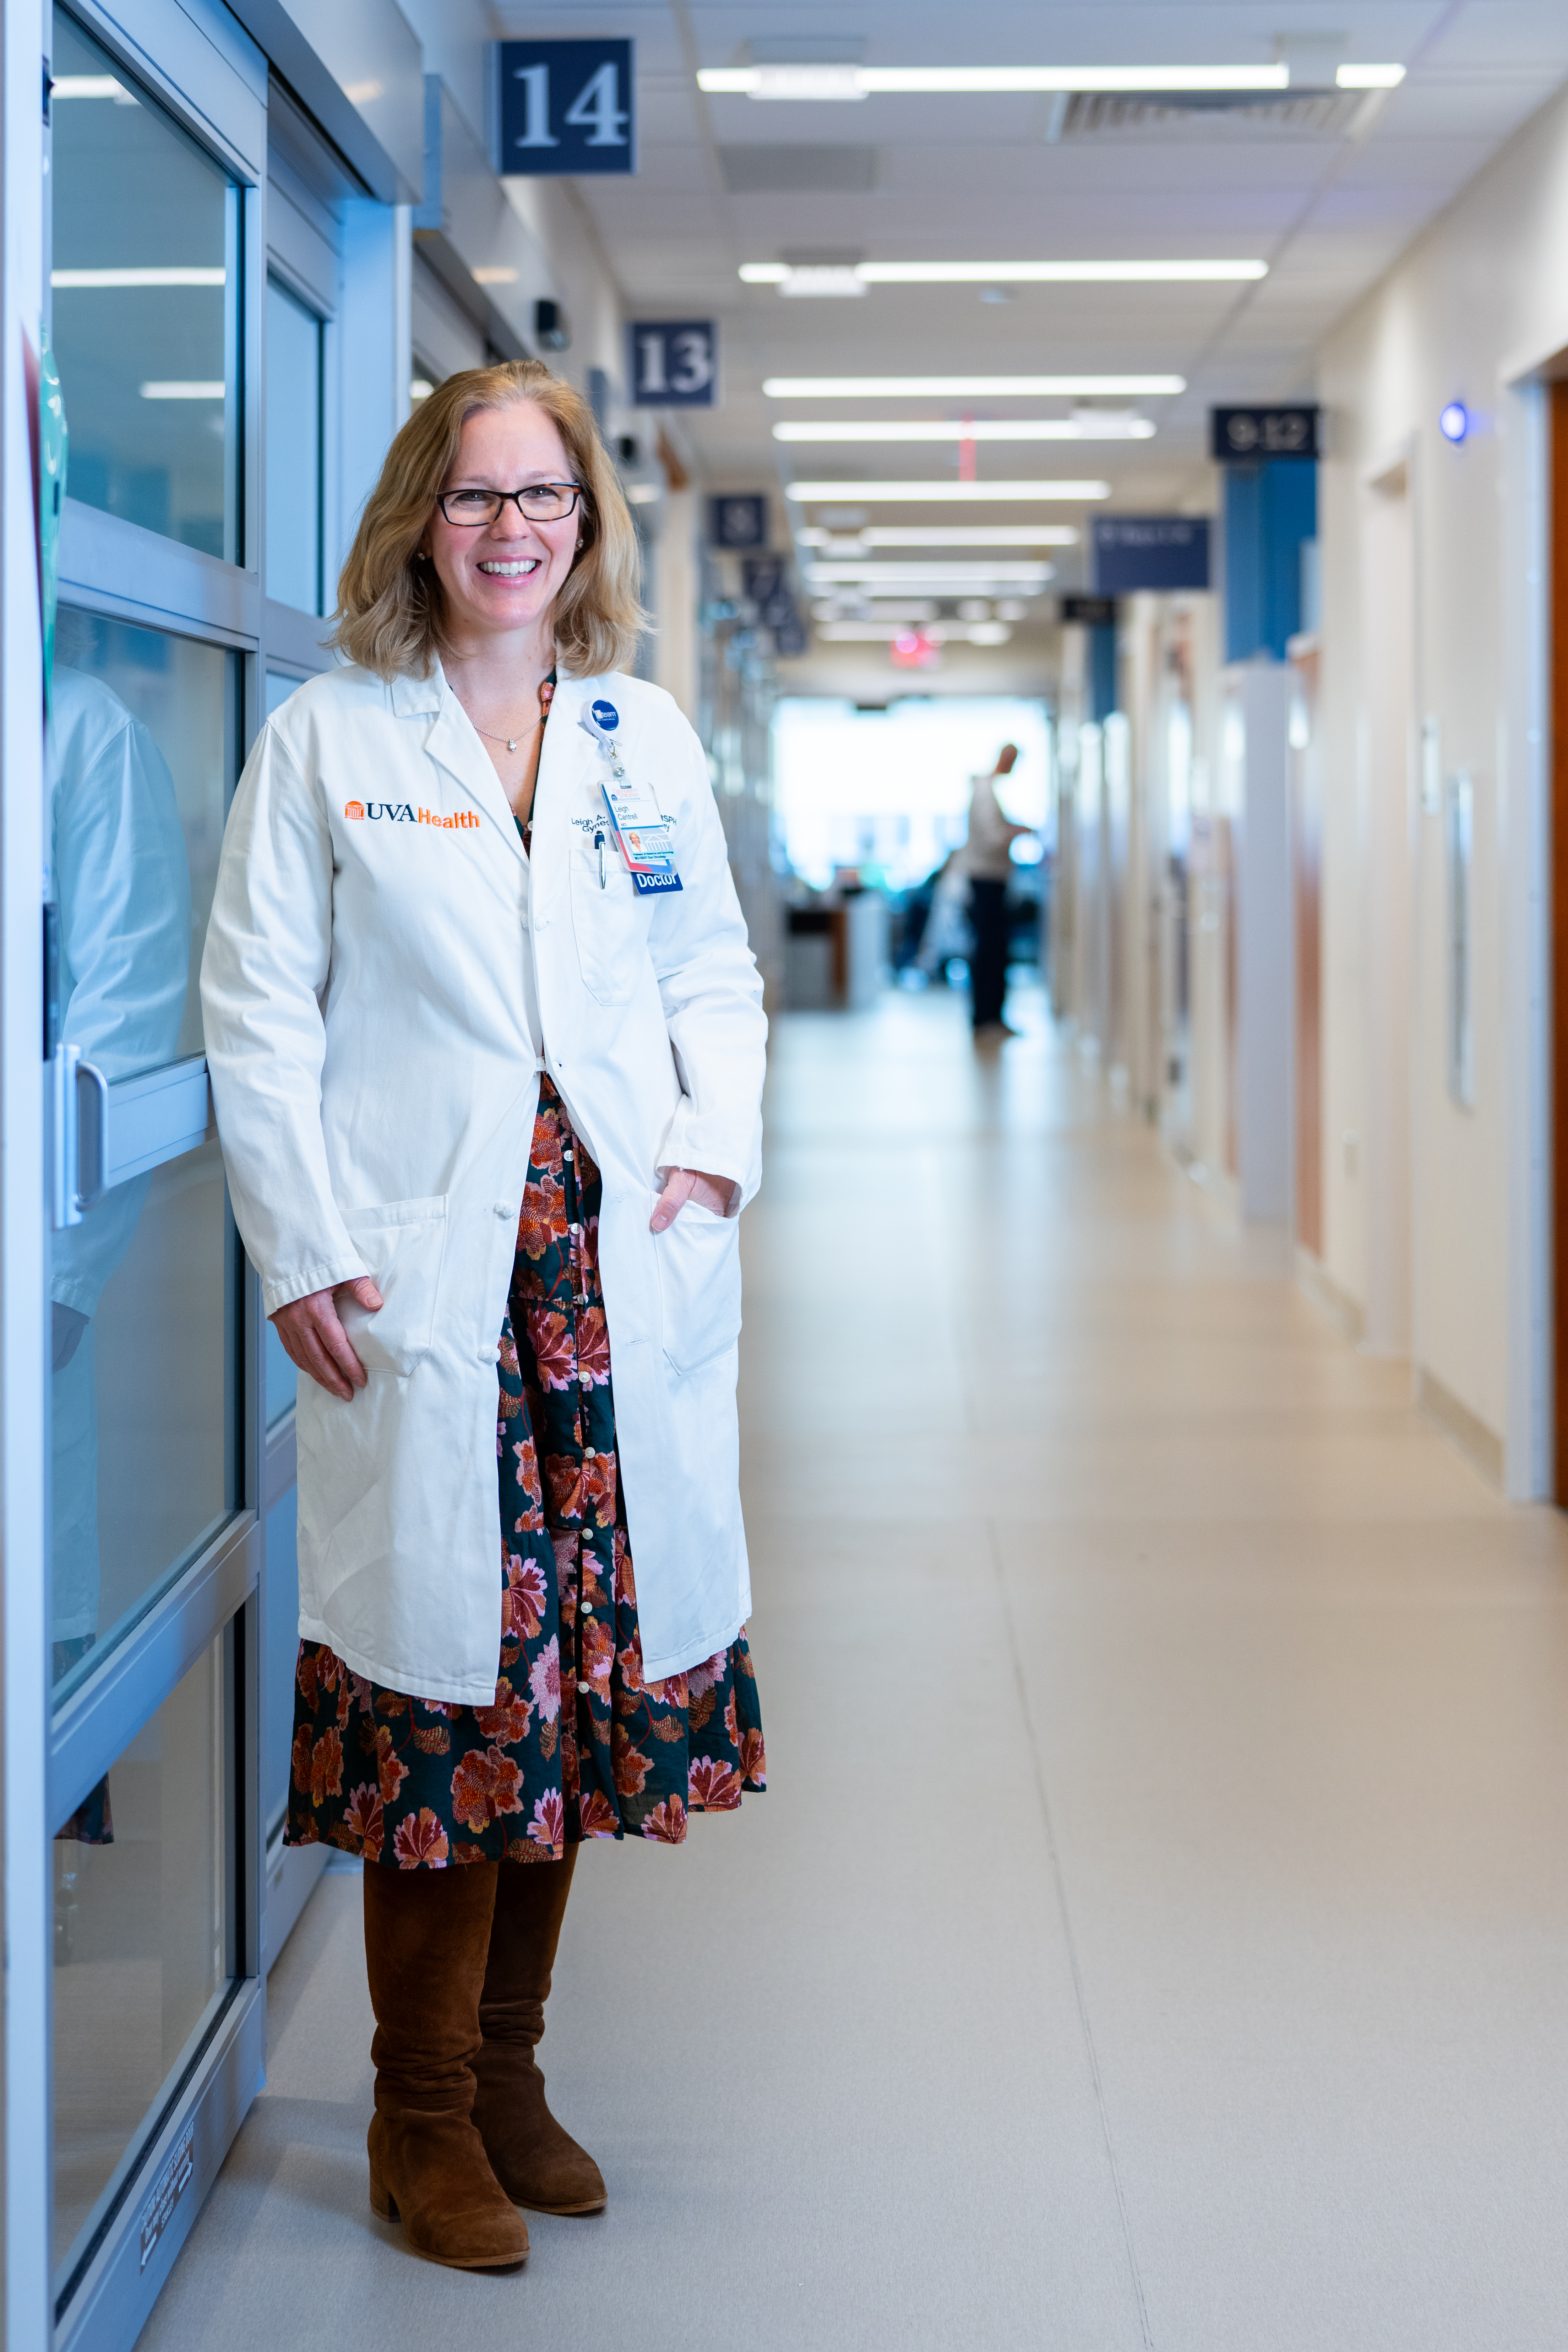 Dr. Cantrell standing in her white coat in the hallway